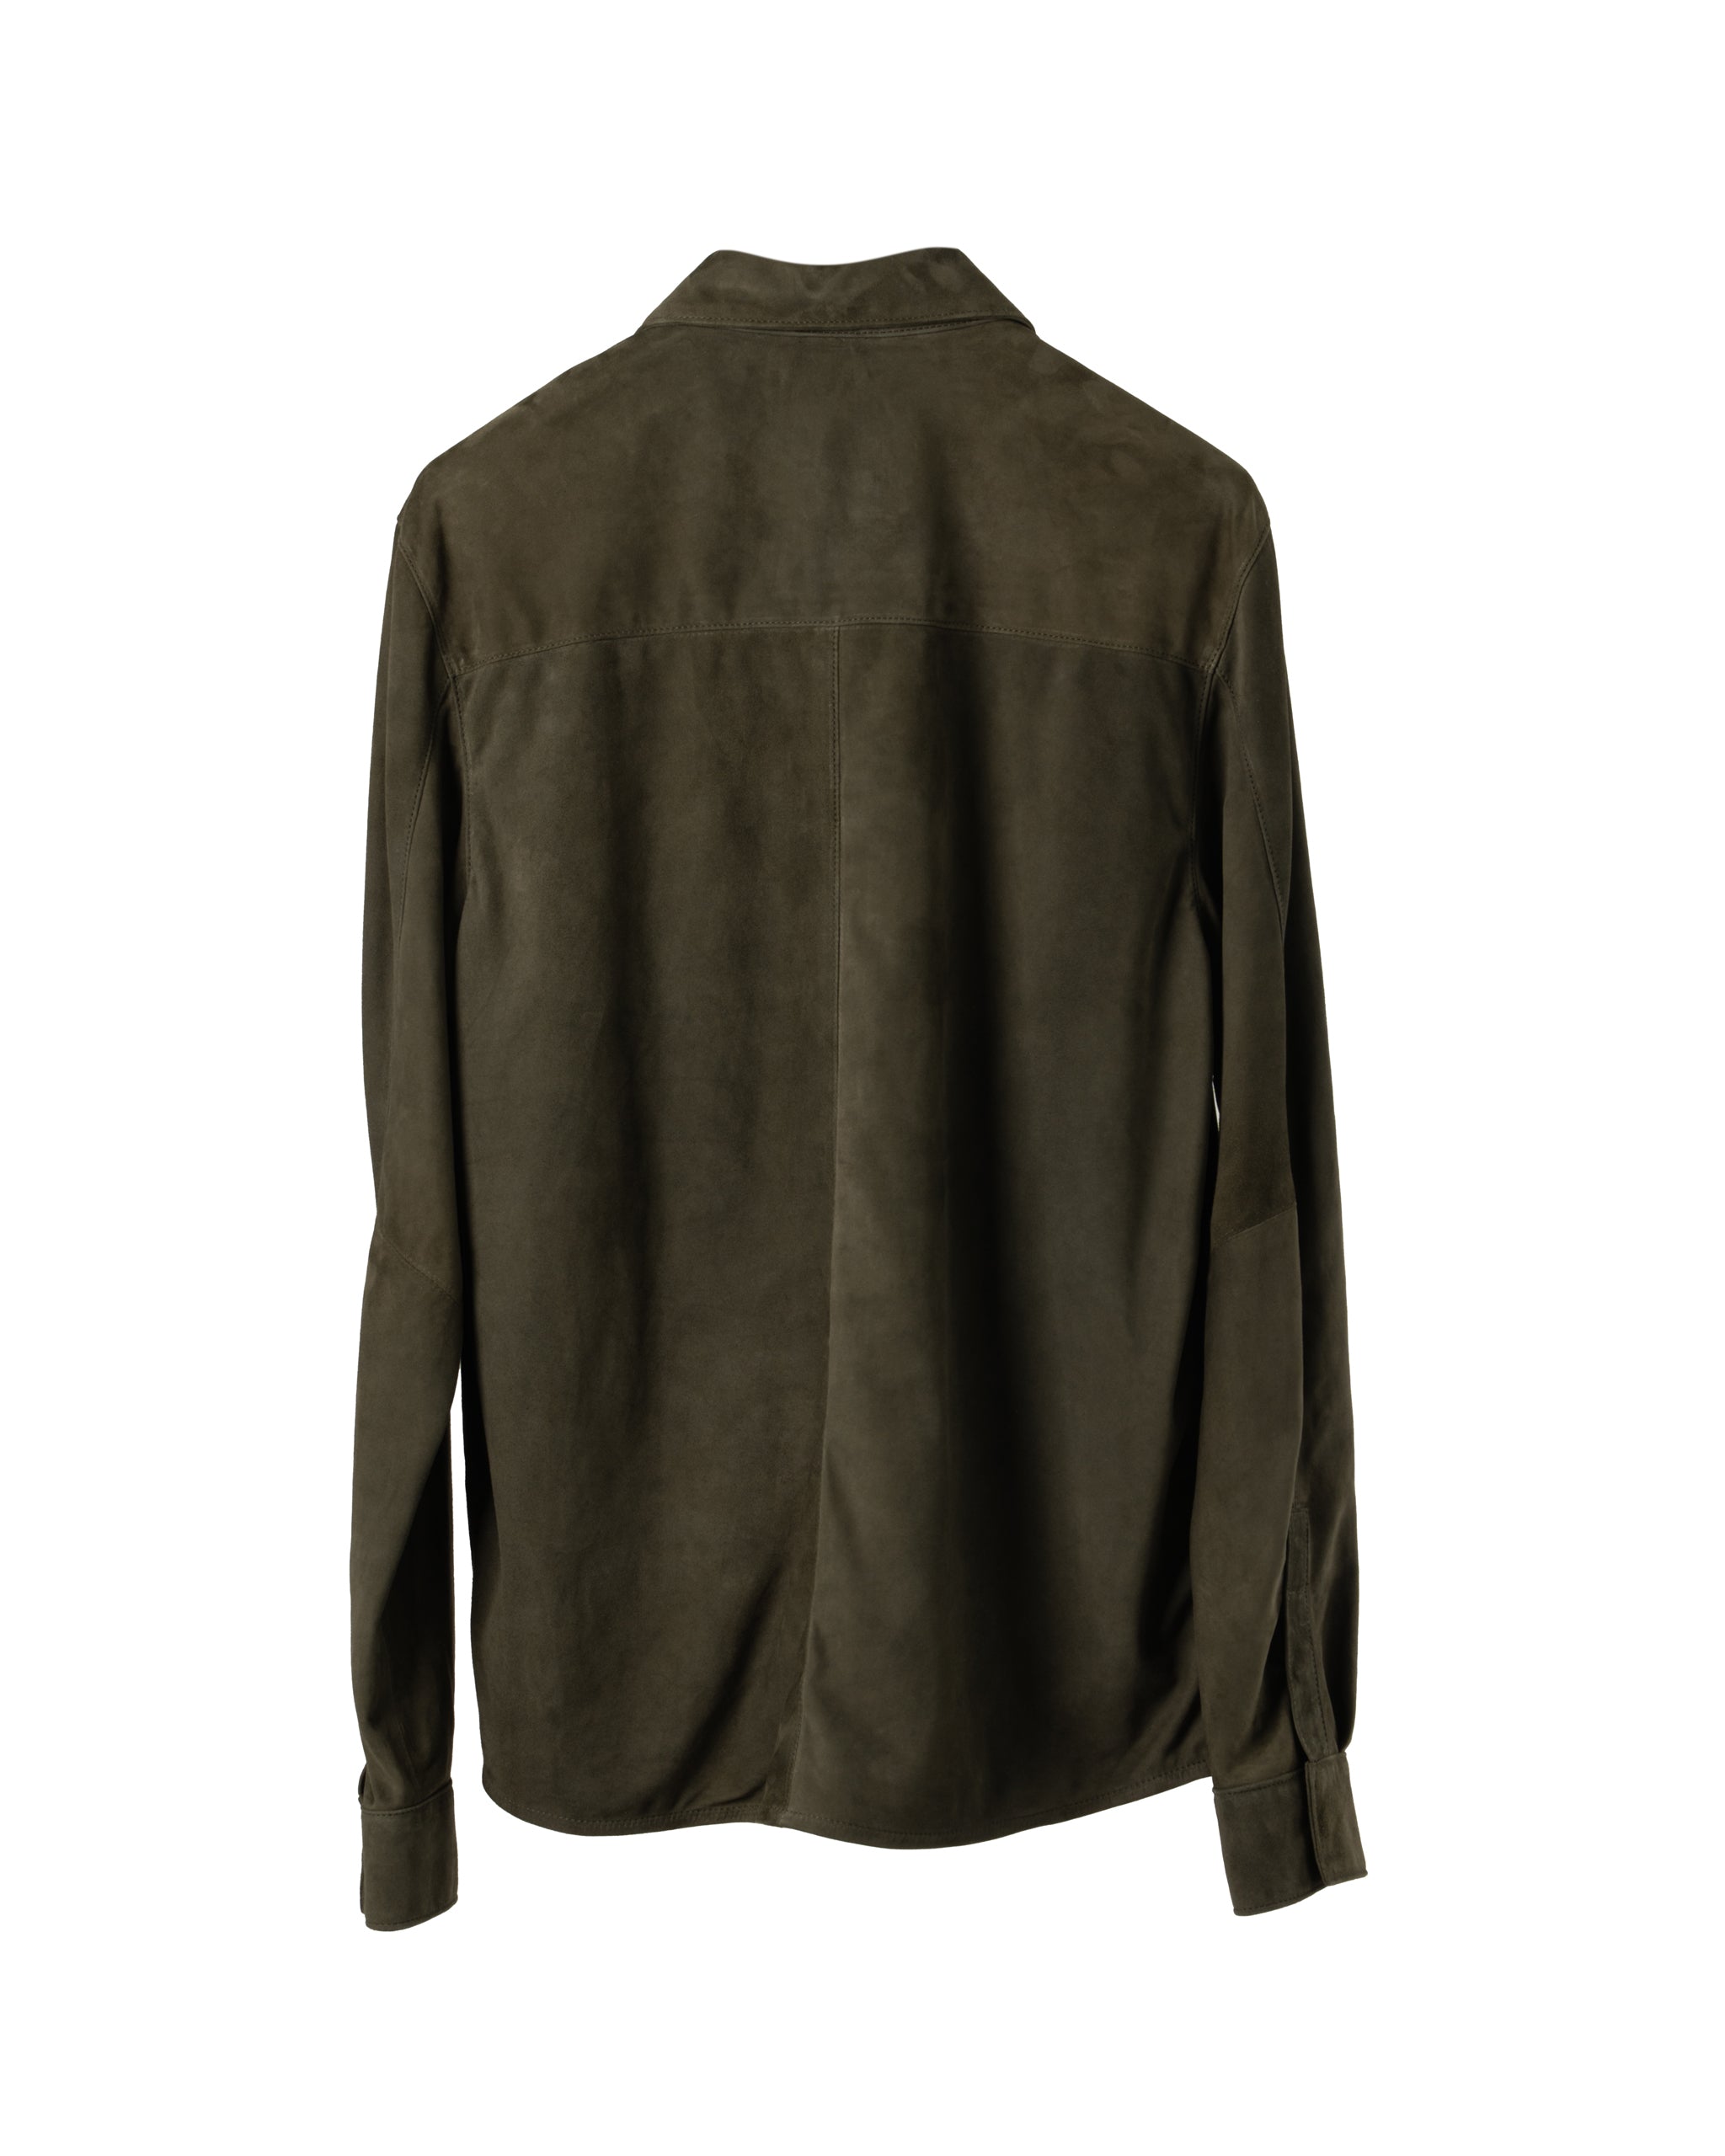 SUEDE LEATHER SHIRT